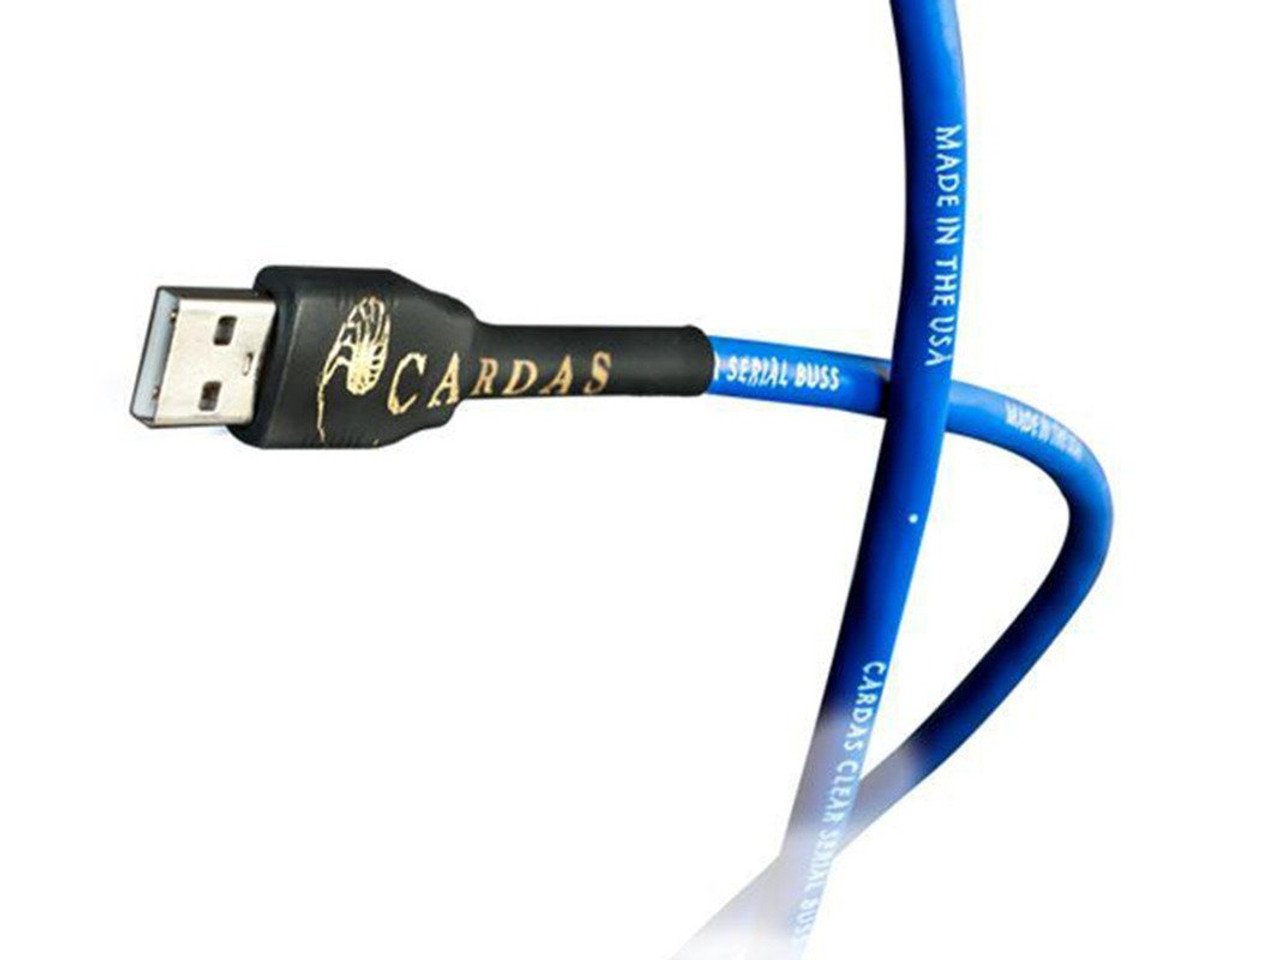 Cardas Clear Serial Bus USB Cable